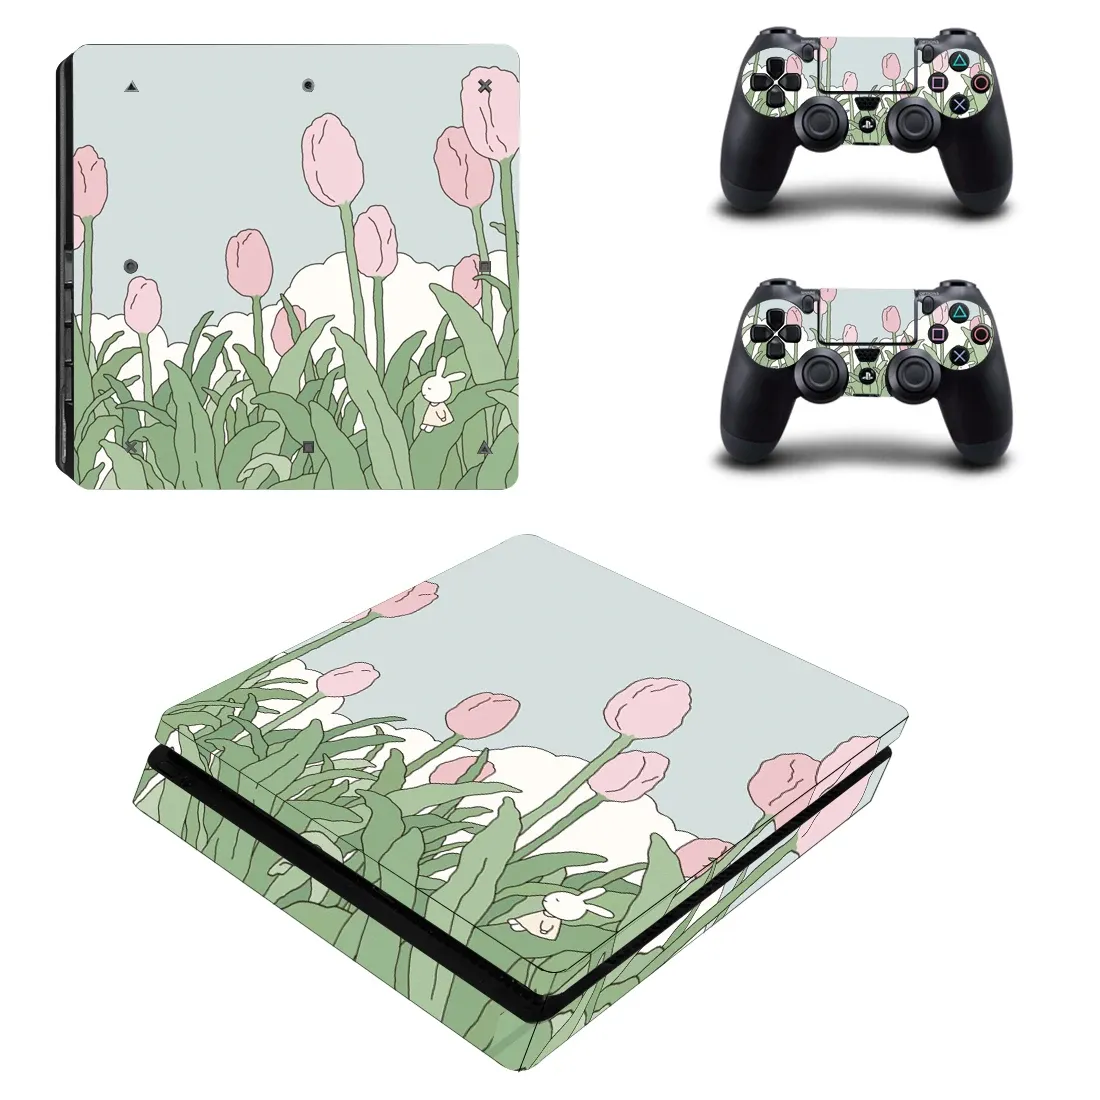 Stickers Tulip Flower Cover PS4 Slim Skin Sticker Decal For PS4 Slim Console & Controller Skin Vinyl